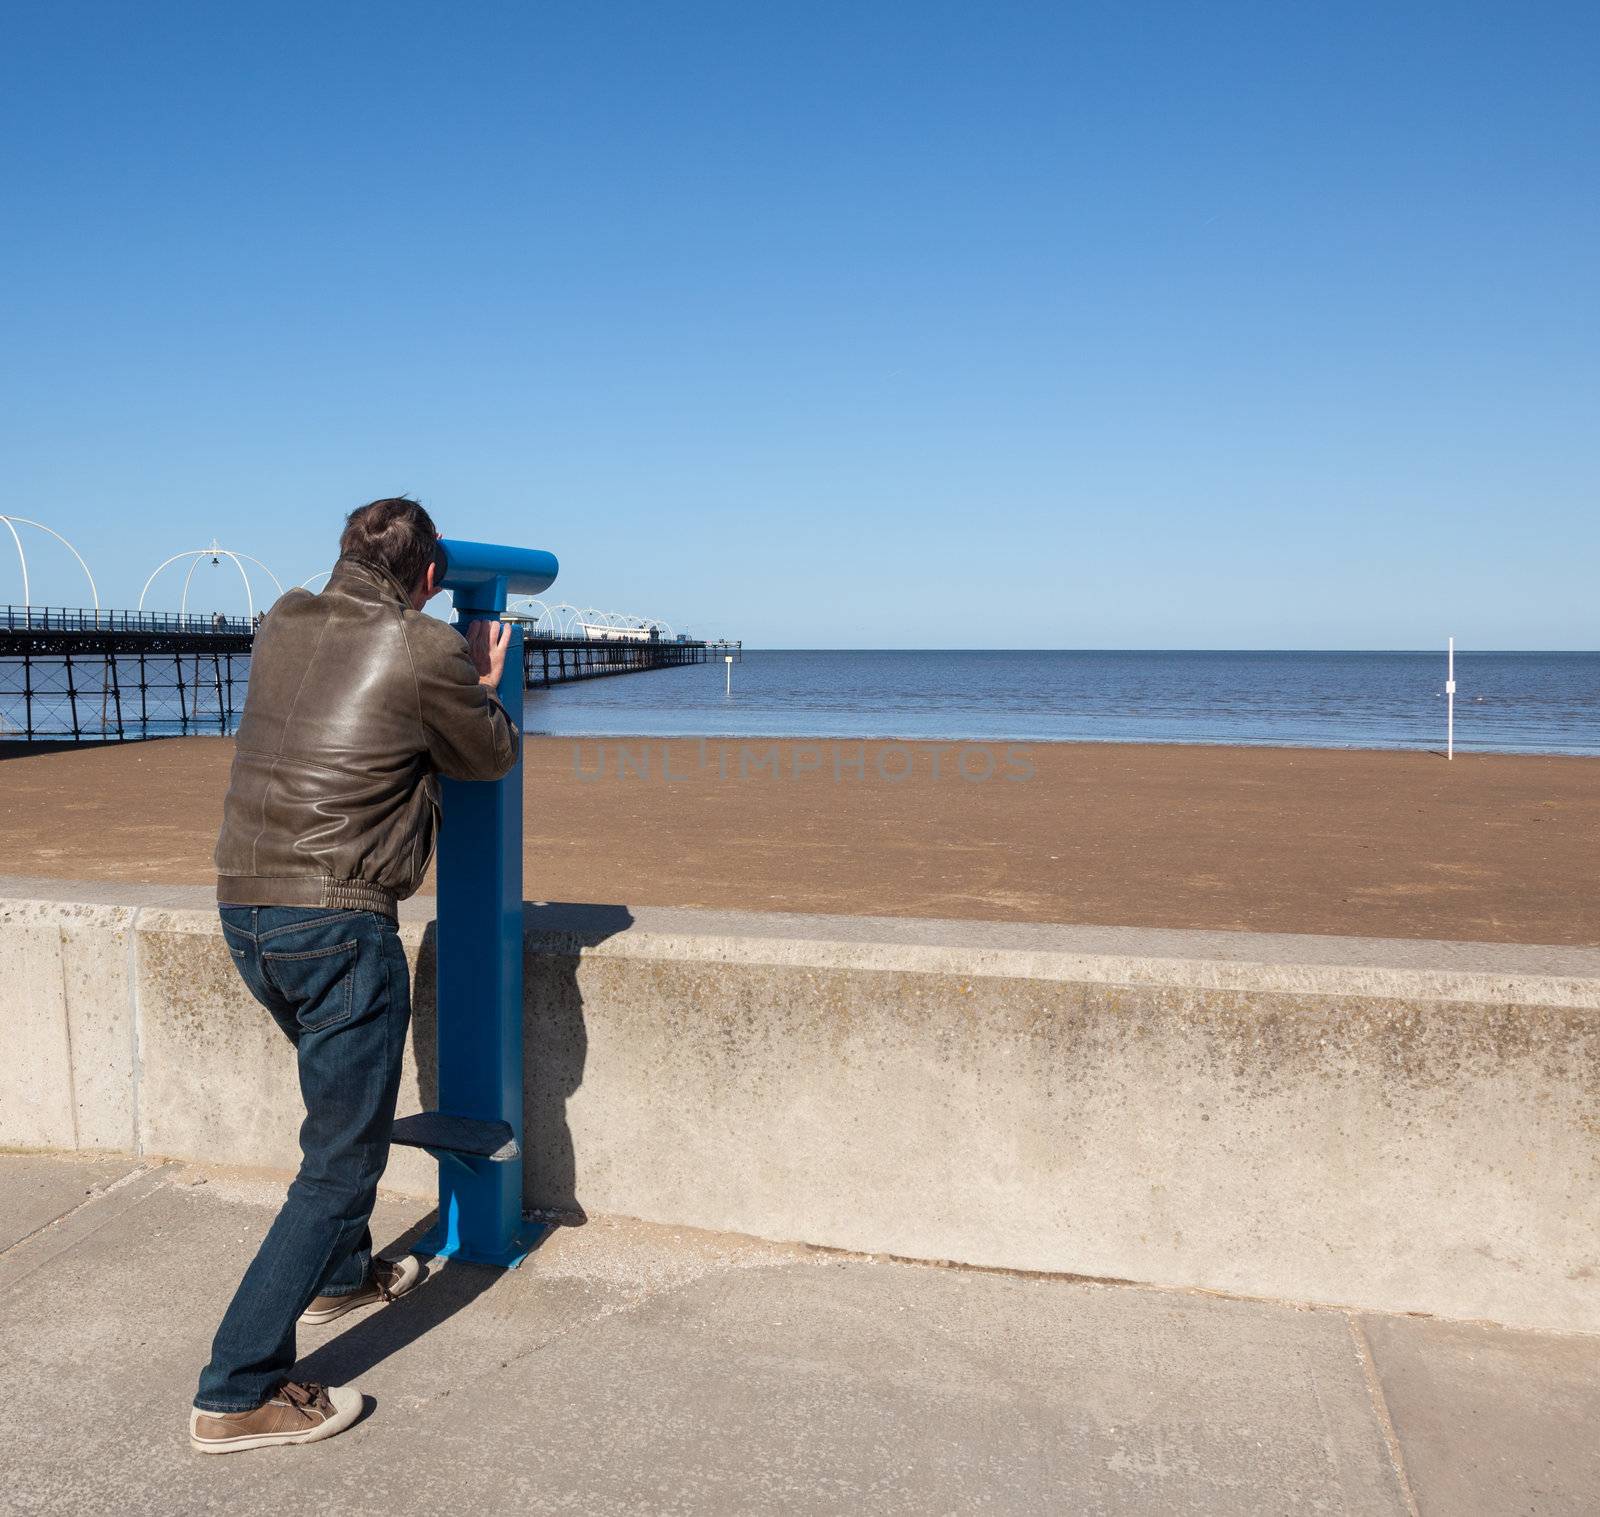 Single caucasian male looking with telescope at sea and pier in Southport England